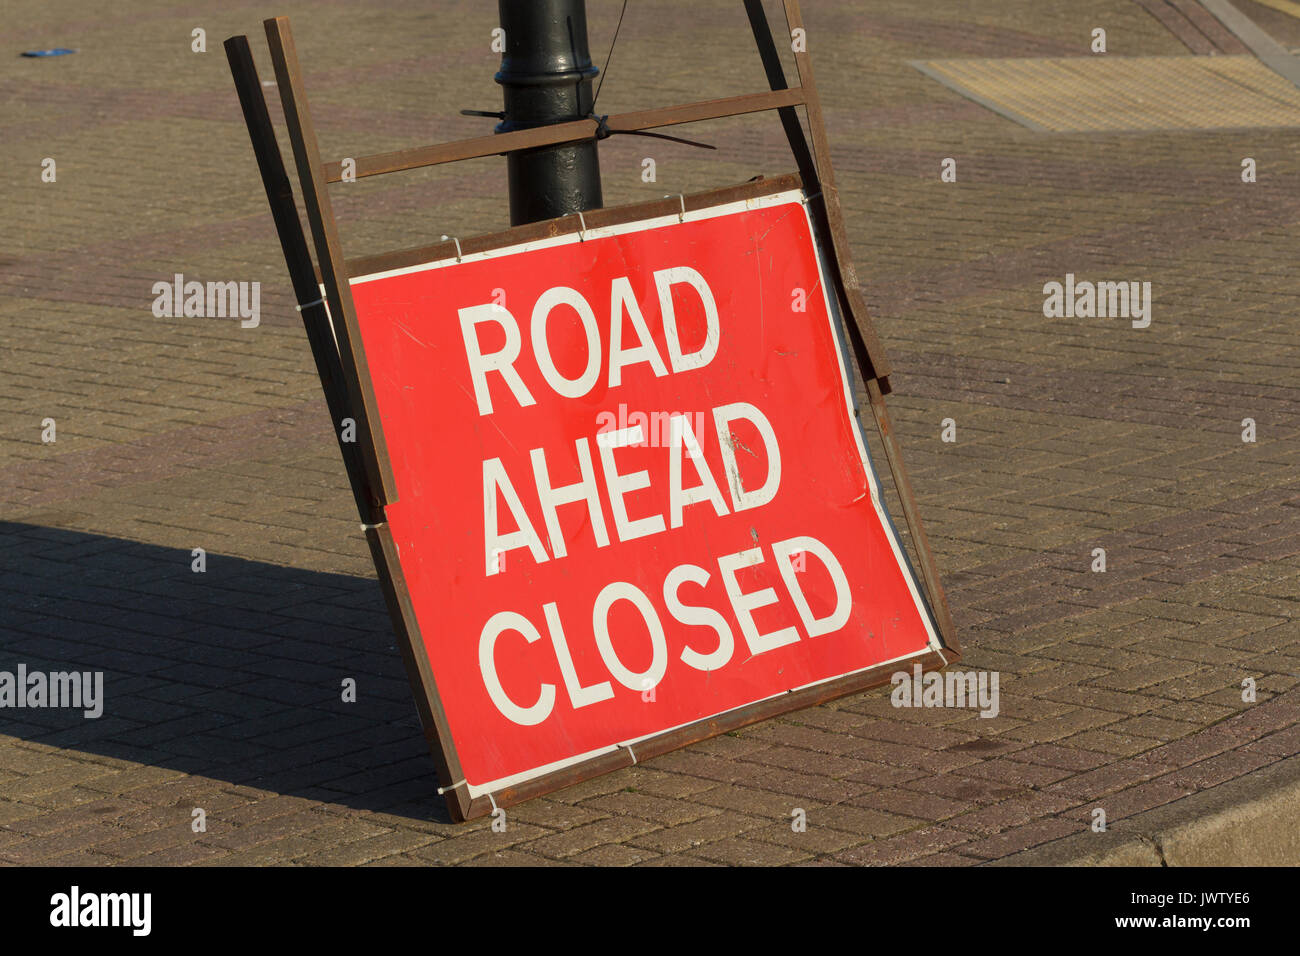 'Road ahead closed' sign, East Yorkshire, England, August Stock Photo